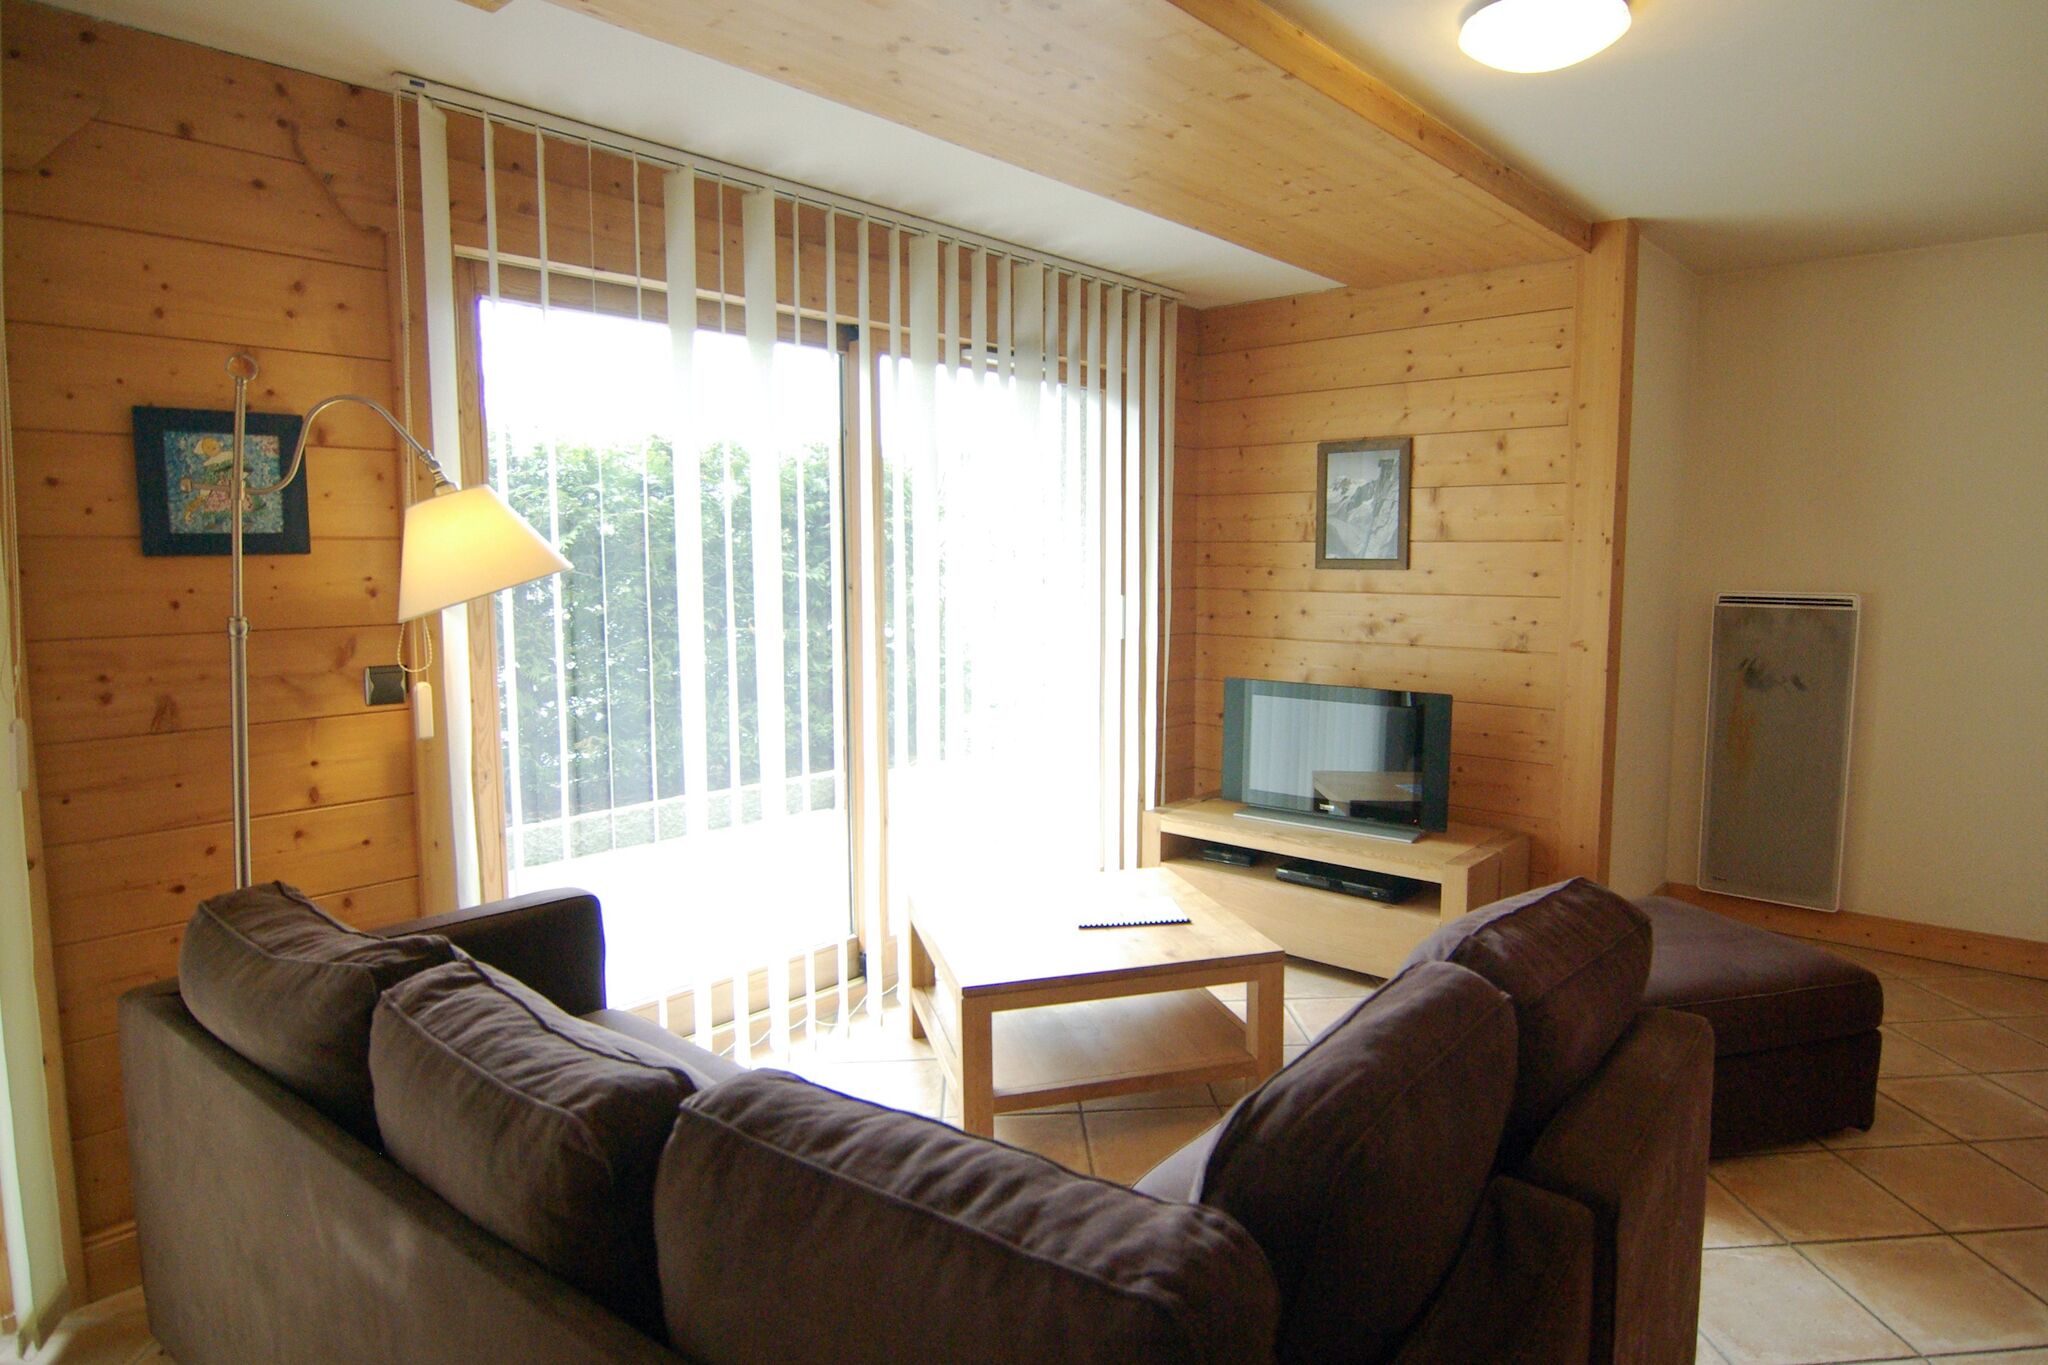 Very nice cozy and bright apartment near the center of Chamonix